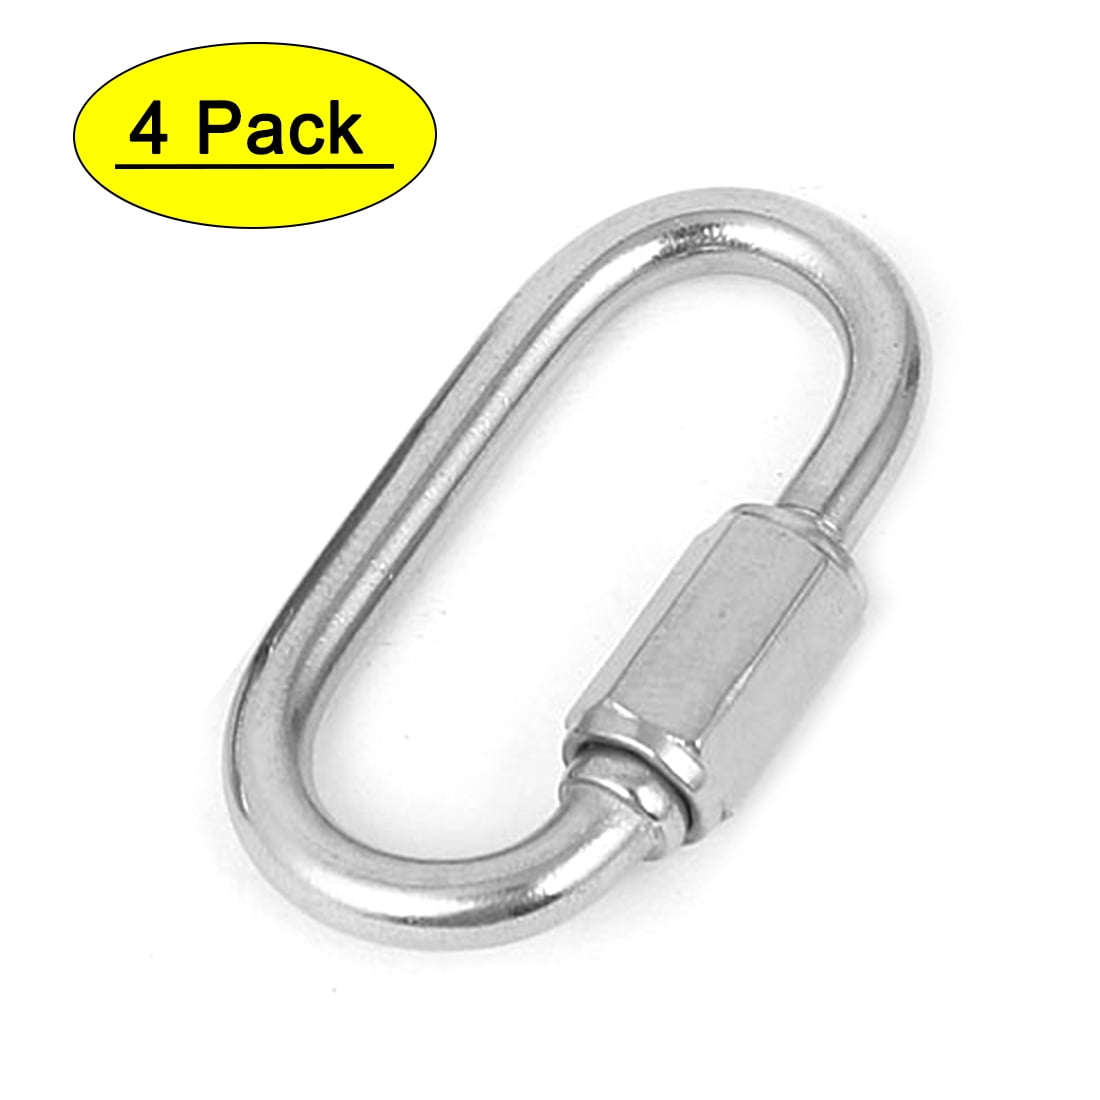 Details about   3 PACK 30KN Stainless Steel Screwgate Locking Carabiner D-Ring Hook for Climbing 